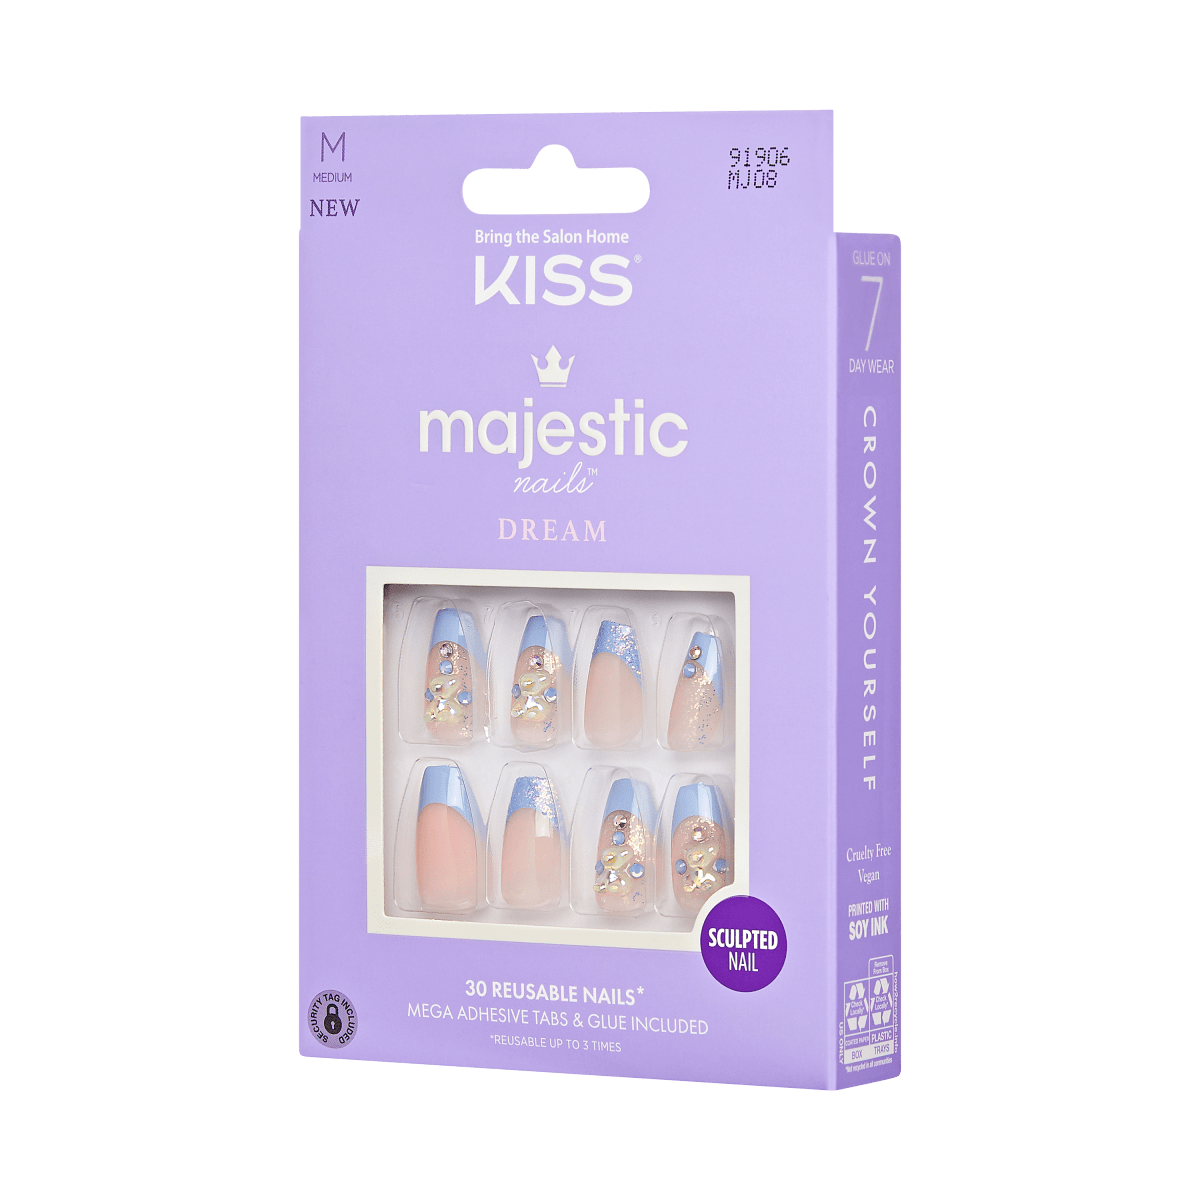 KISS Majestic Nails - The Queen